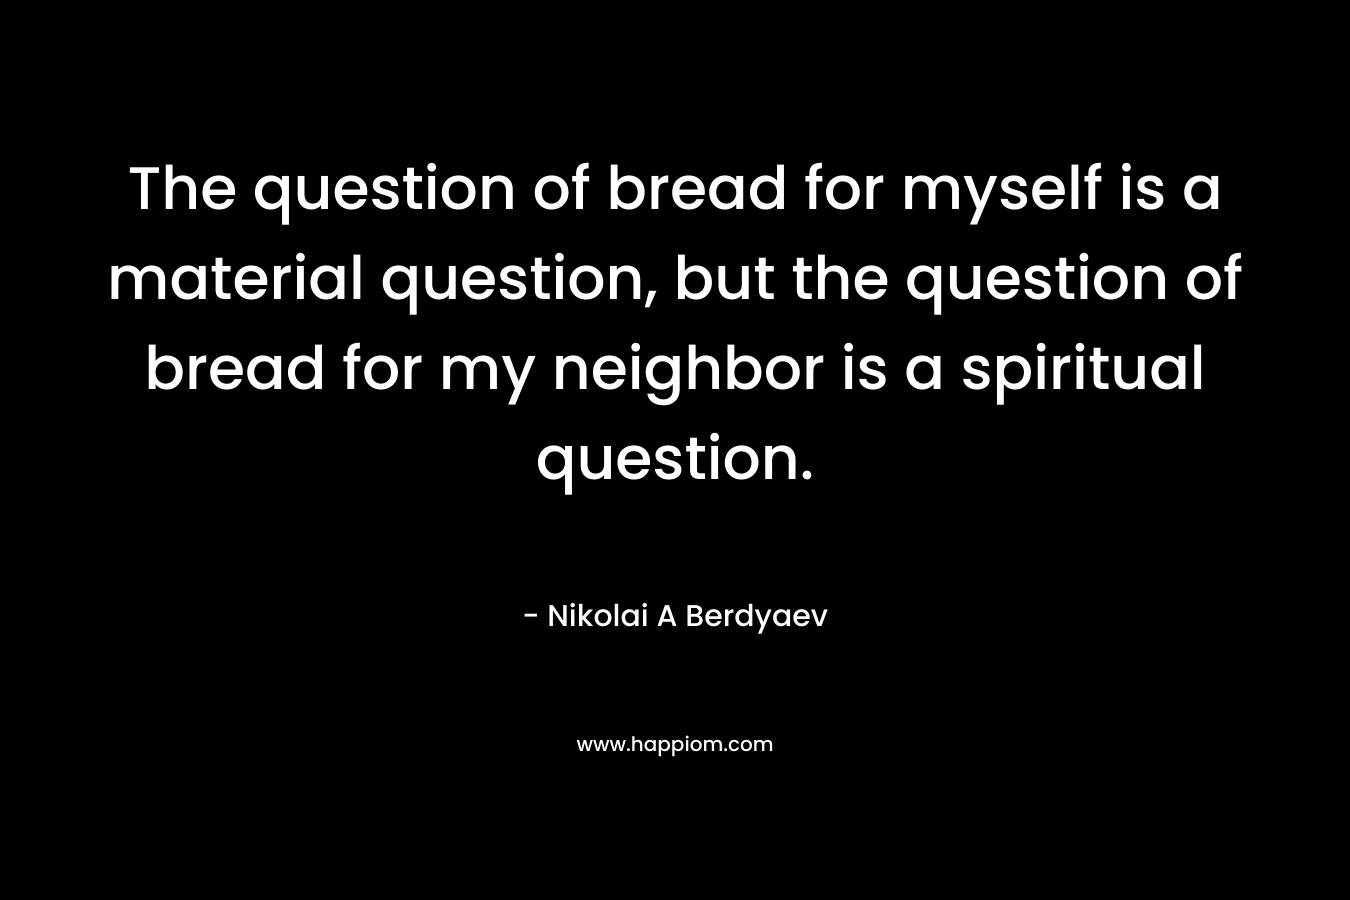 The question of bread for myself is a material question, but the question of bread for my neighbor is a spiritual question. – Nikolai A Berdyaev